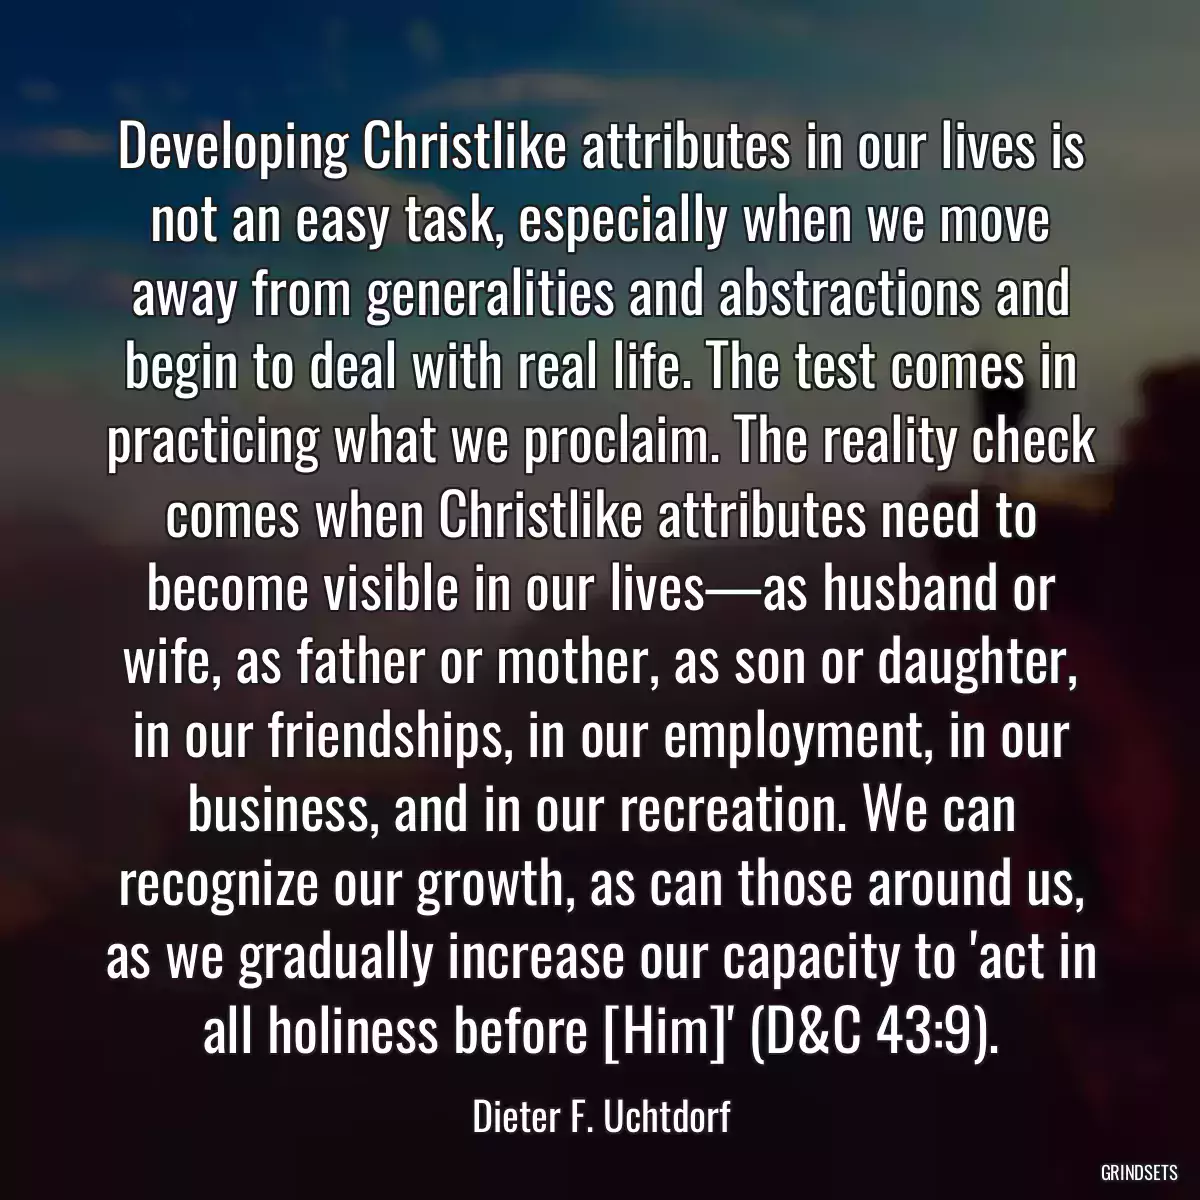 Developing Christlike attributes in our lives is not an easy task, especially when we move away from generalities and abstractions and begin to deal with real life. The test comes in practicing what we proclaim. The reality check comes when Christlike attributes need to become visible in our lives—as husband or wife, as father or mother, as son or daughter, in our friendships, in our employment, in our business, and in our recreation. We can recognize our growth, as can those around us, as we gradually increase our capacity to \'act in all holiness before [Him]\' (D&C 43:9).